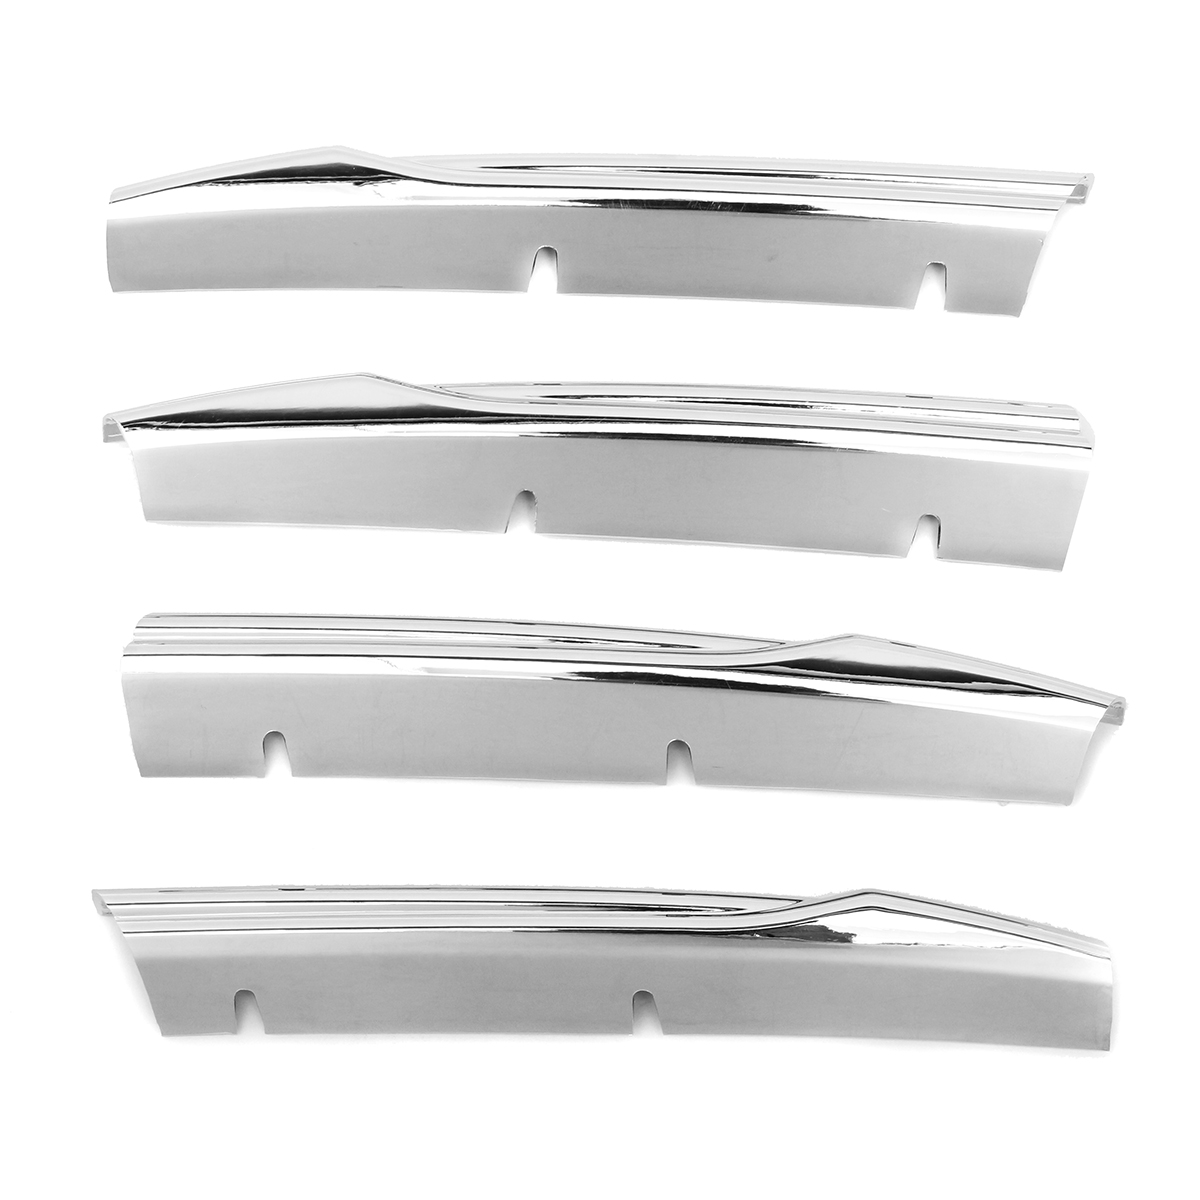 

Auto Front Air Grille Cover ABS Chorme Decoration Trim Strips For Audi A3 Sedan